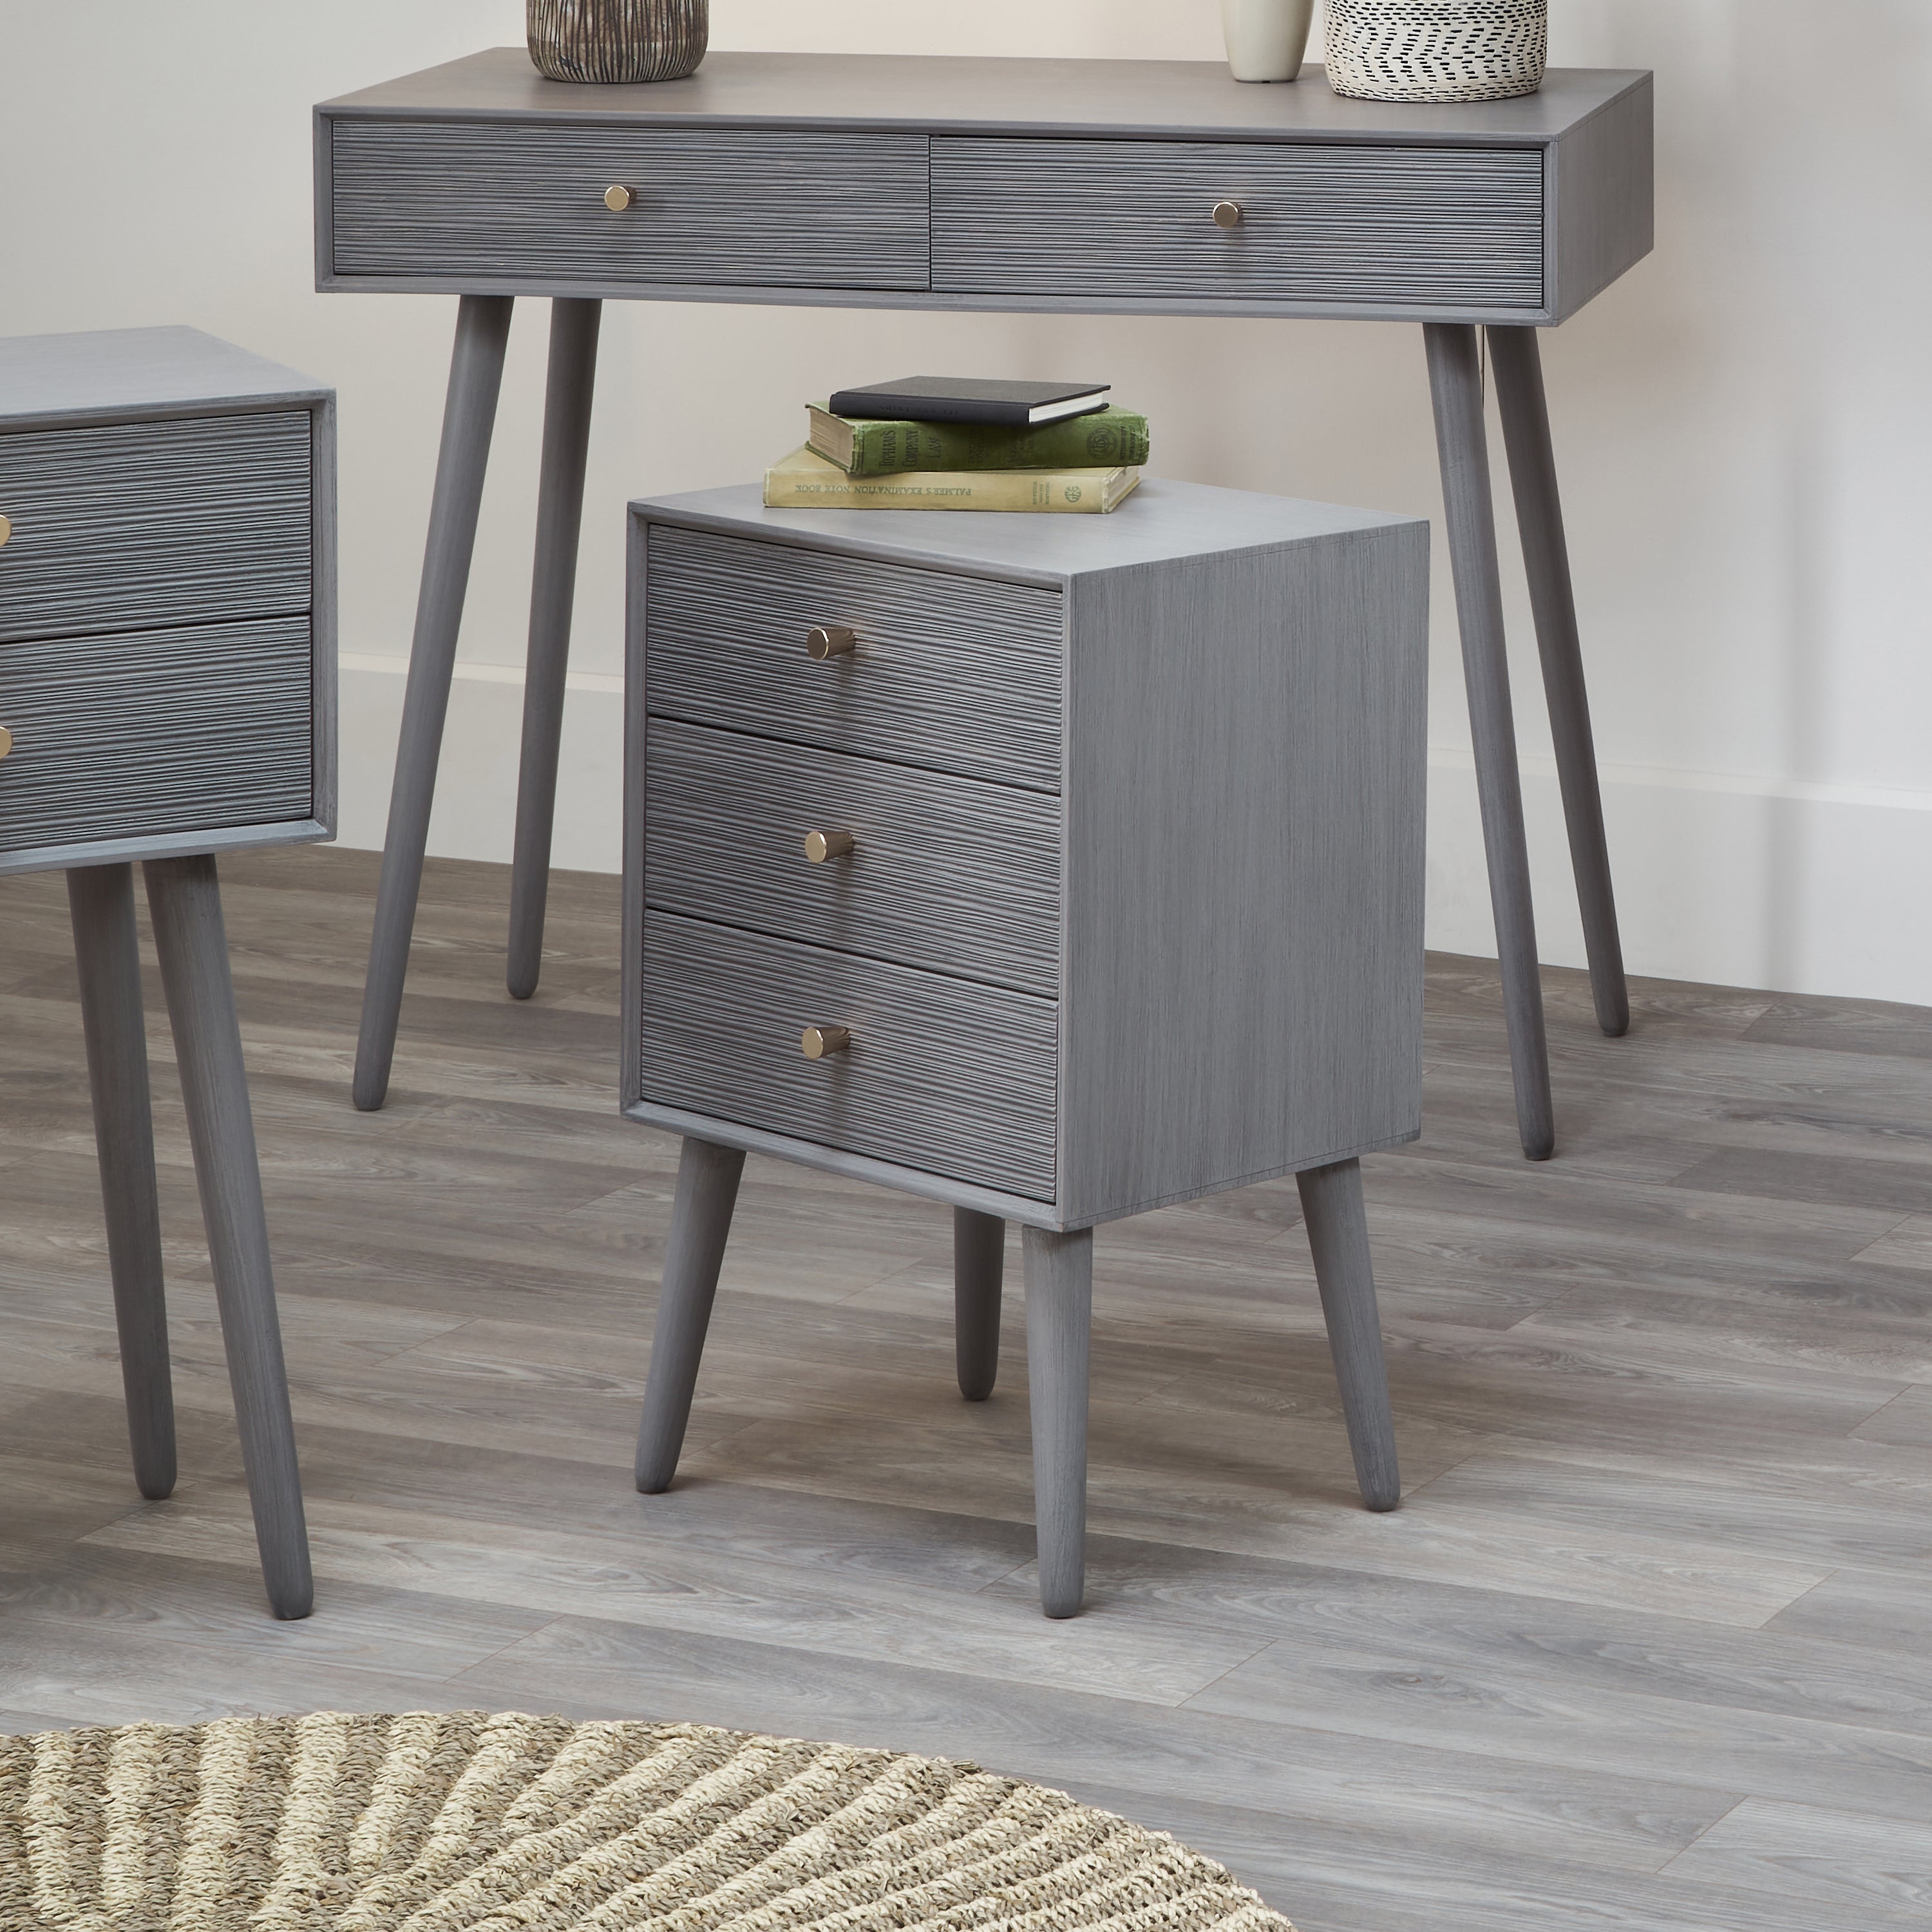 Pacific Chaya 3 Drawer Bedside Table Grey Pine Grey